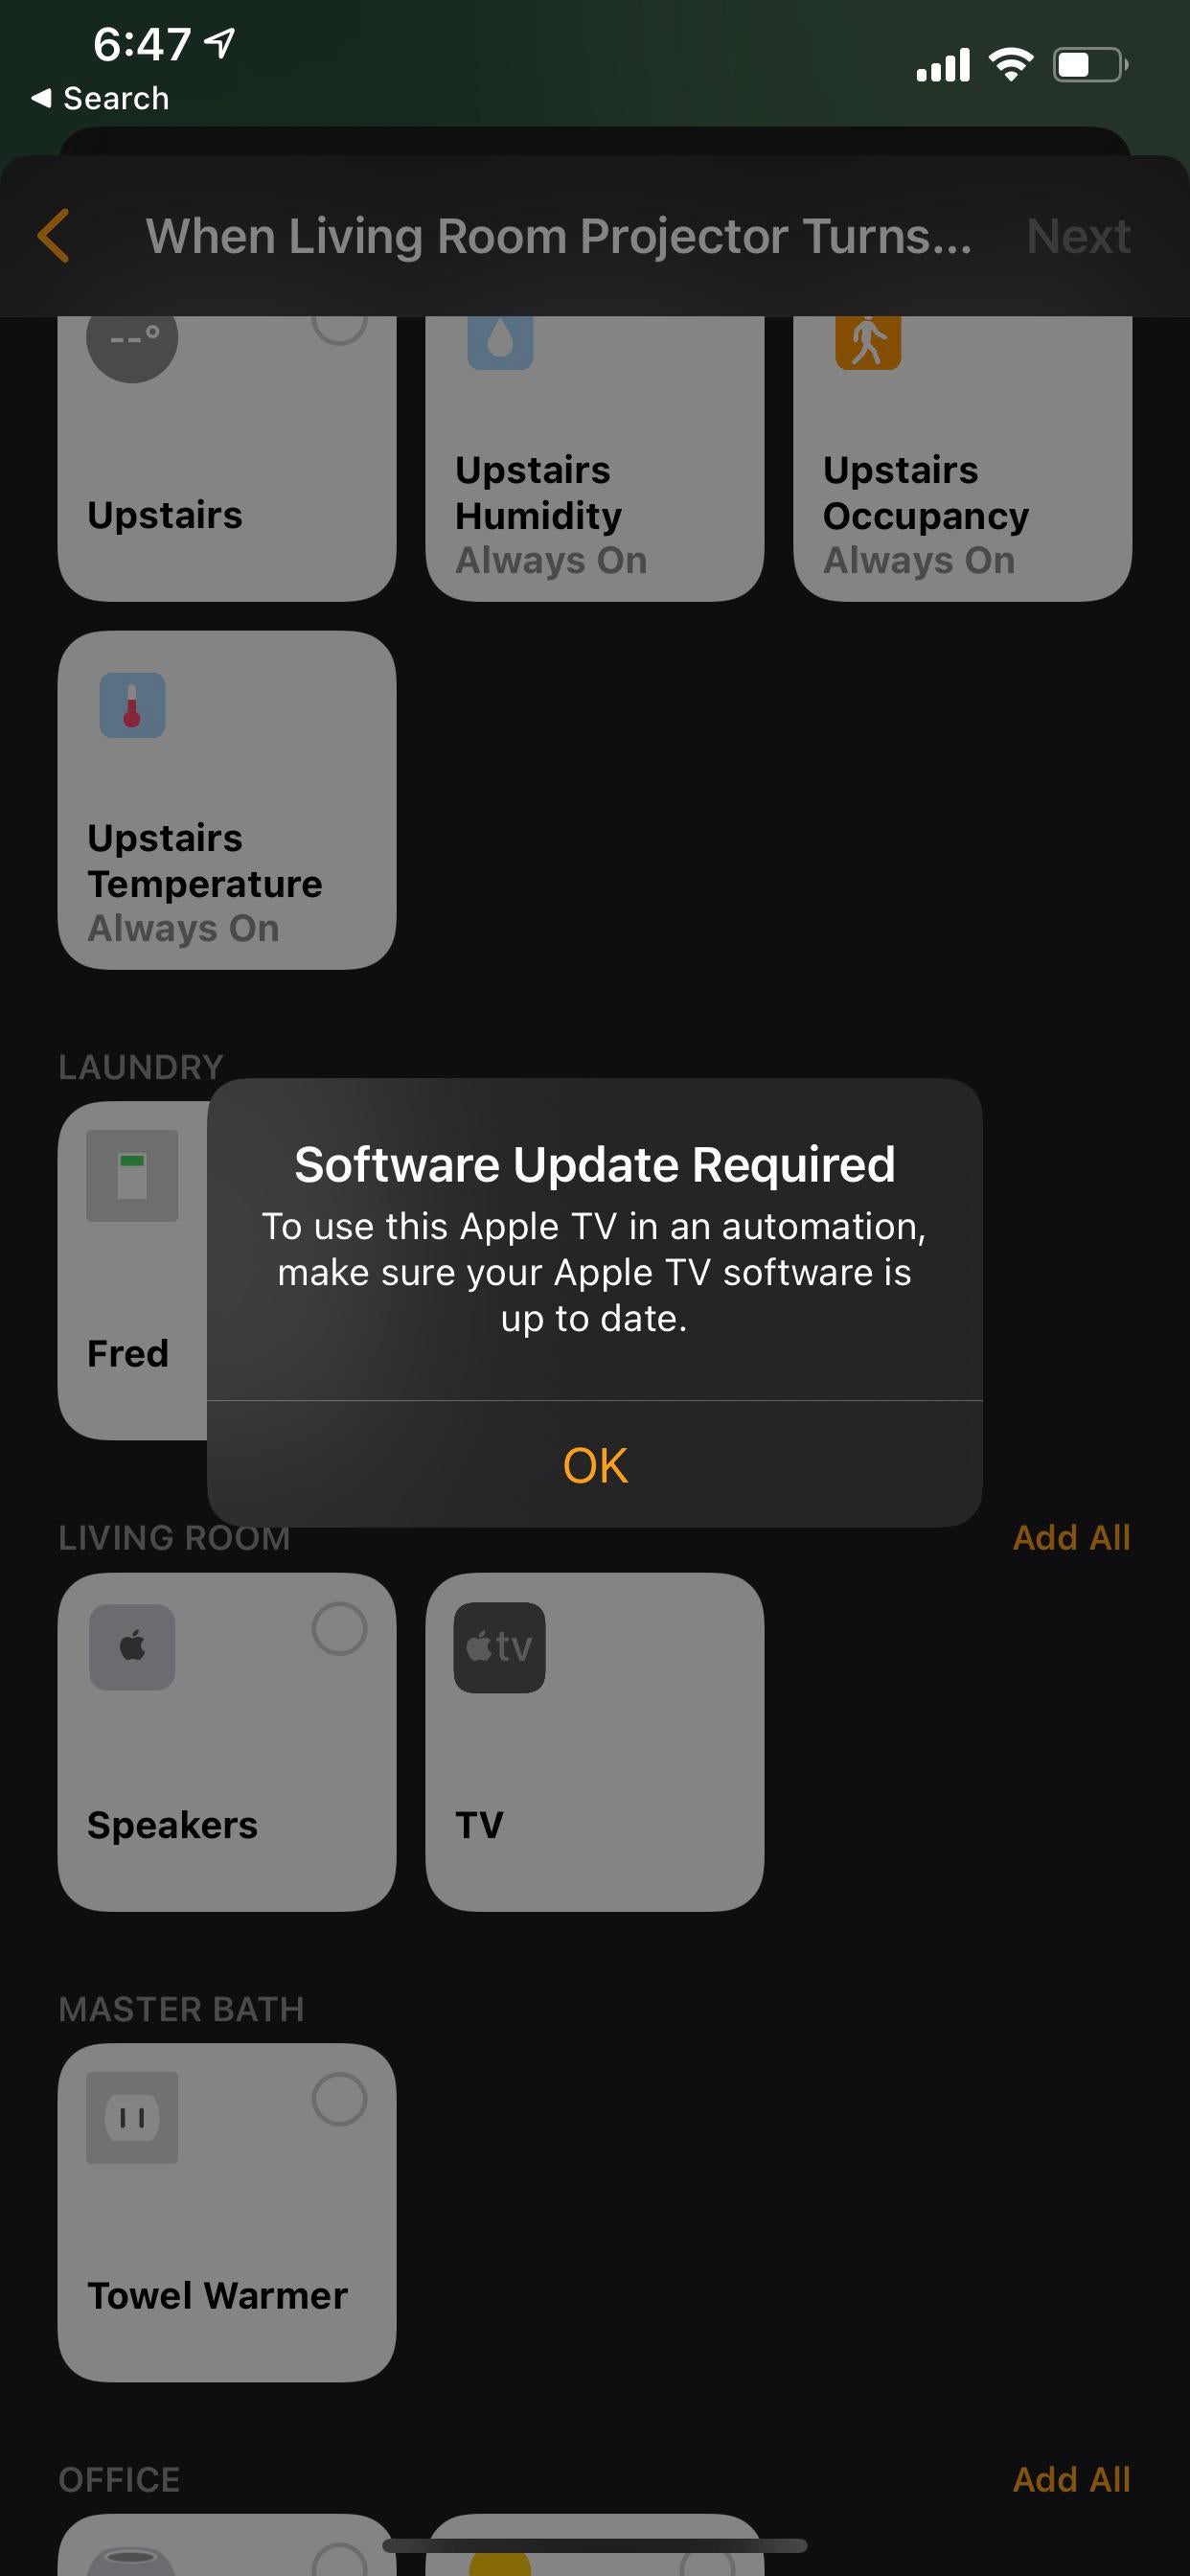 Is it necessary to update the Apple TV software for